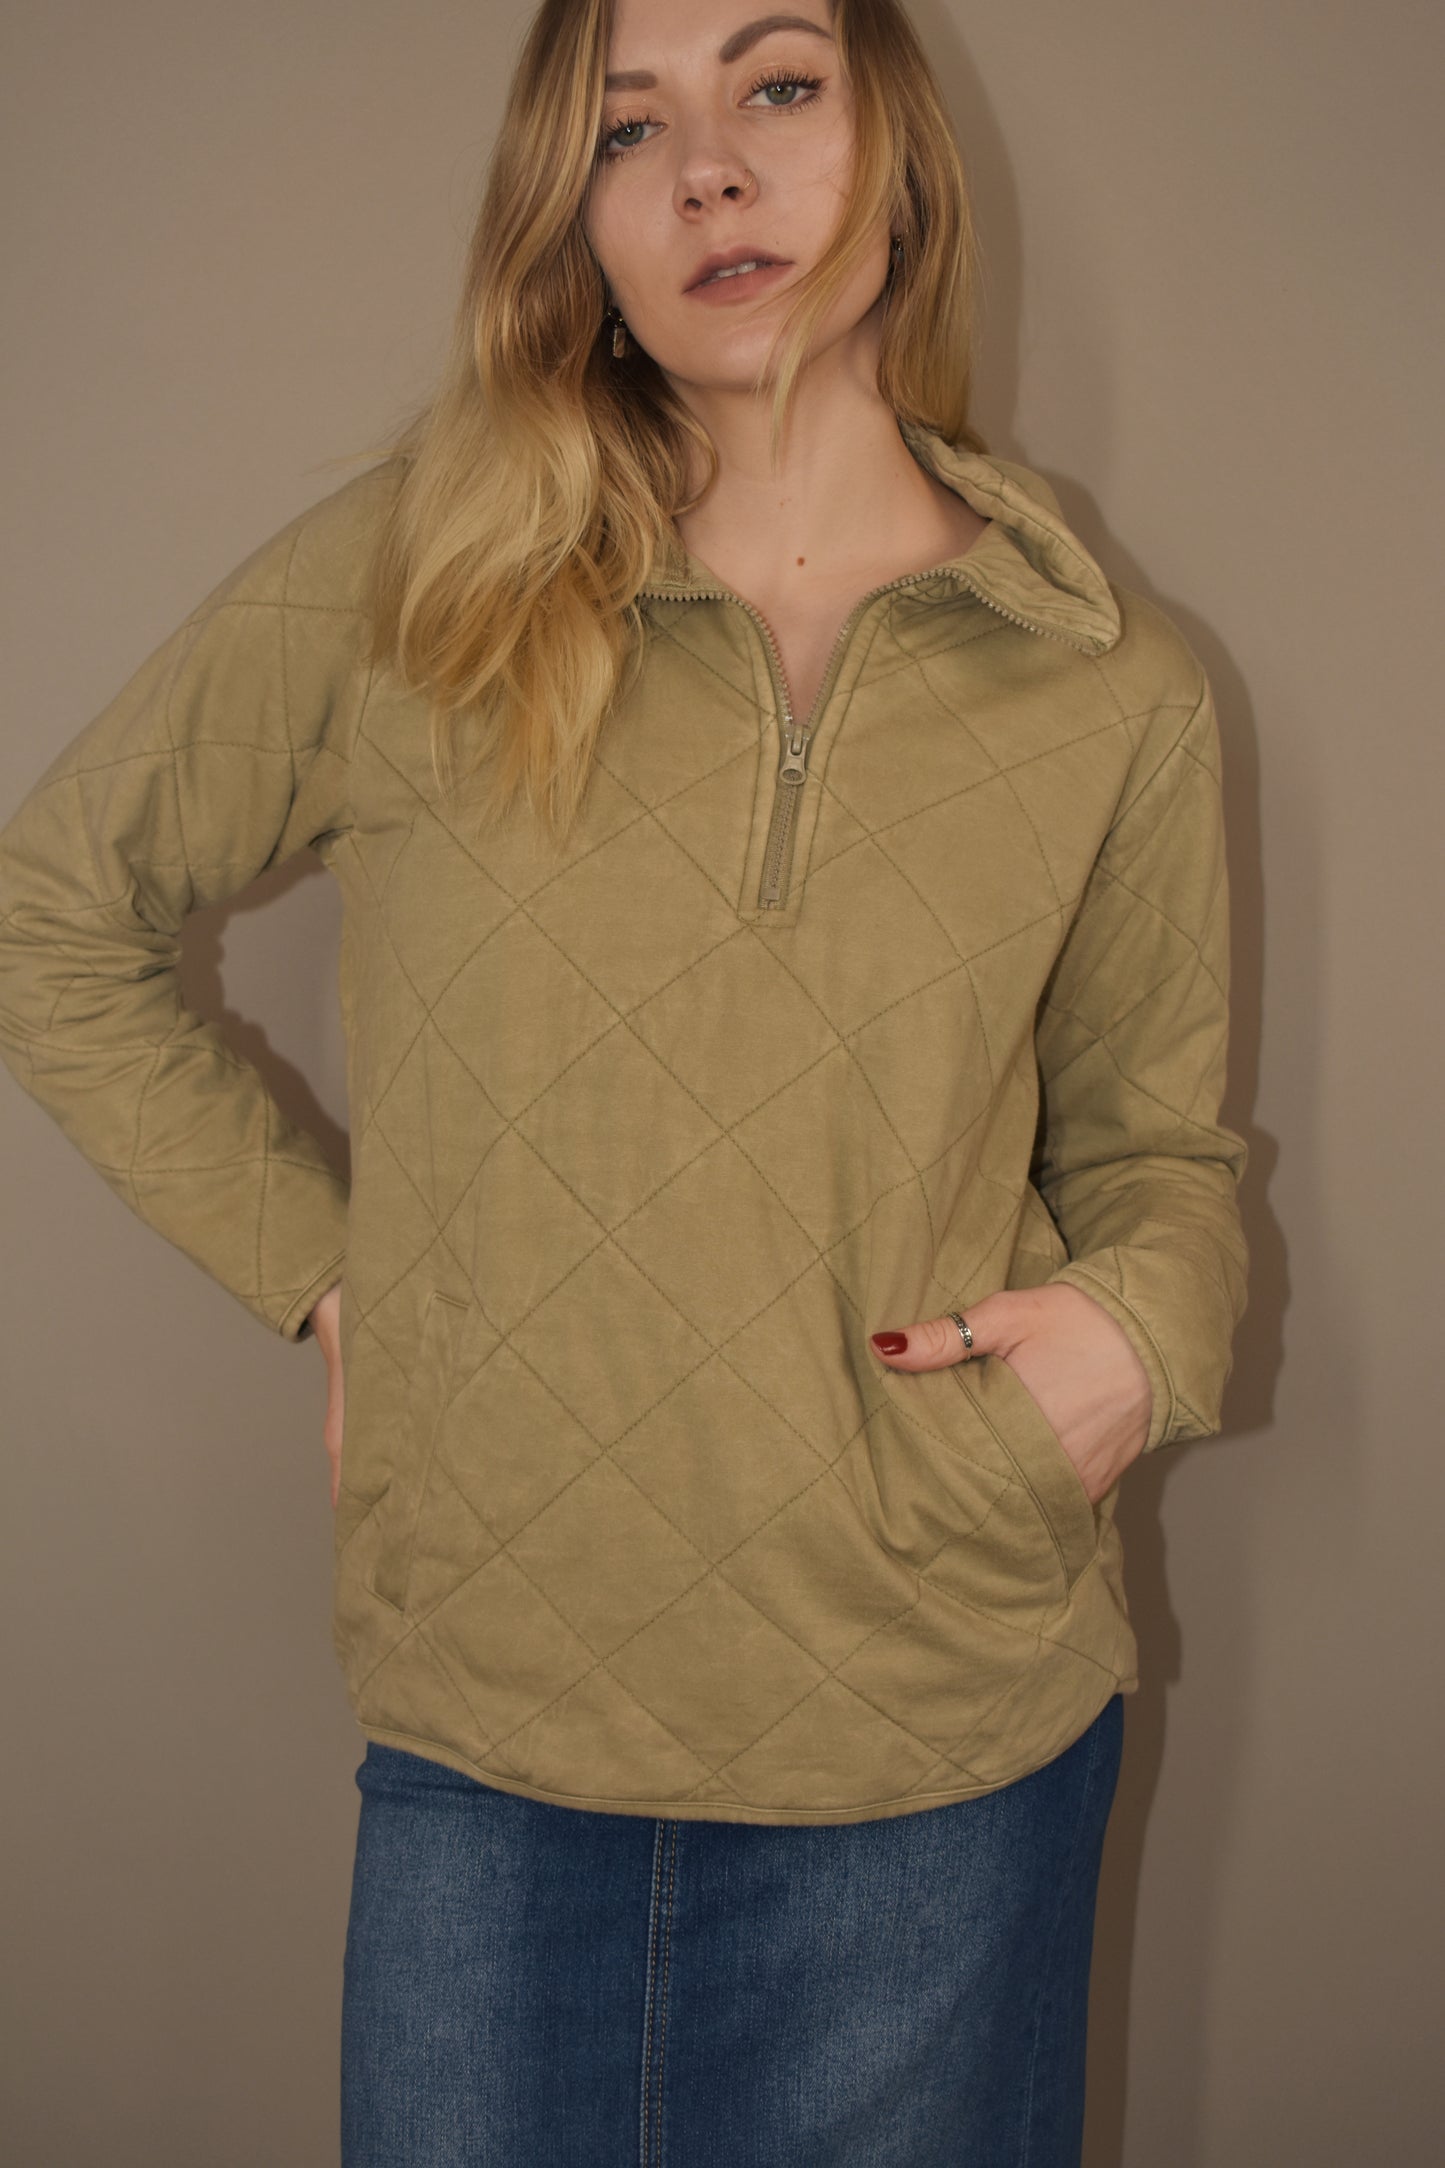 full length quilted half zip pullover with front sweatshirt pocket